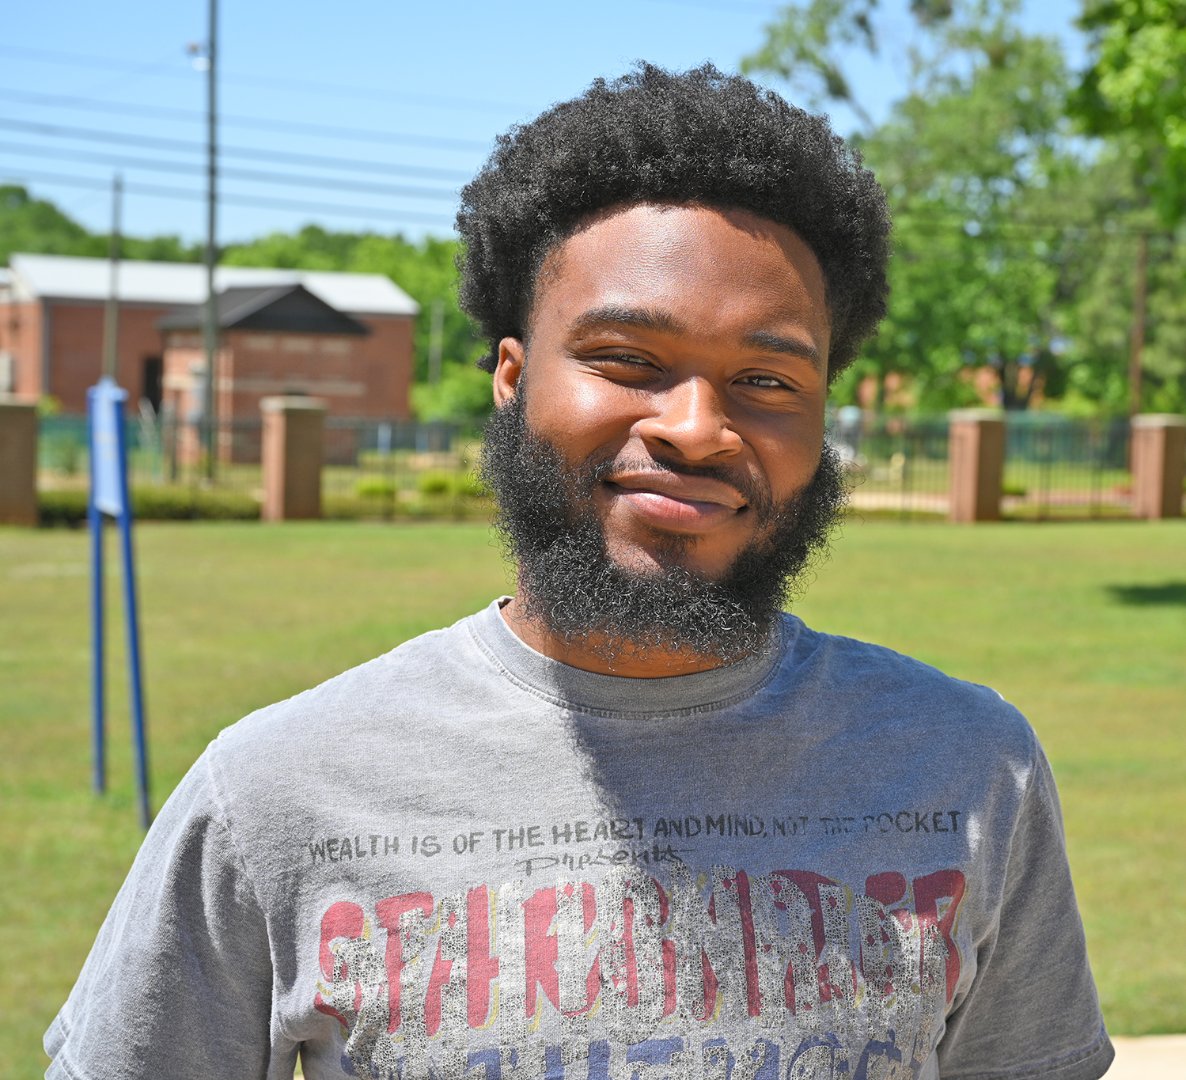 Dartavious Pearson, a native of Dadeville, Alabama, will graduate from Fort Valley State University May 14, with a degree in food and nutrition.